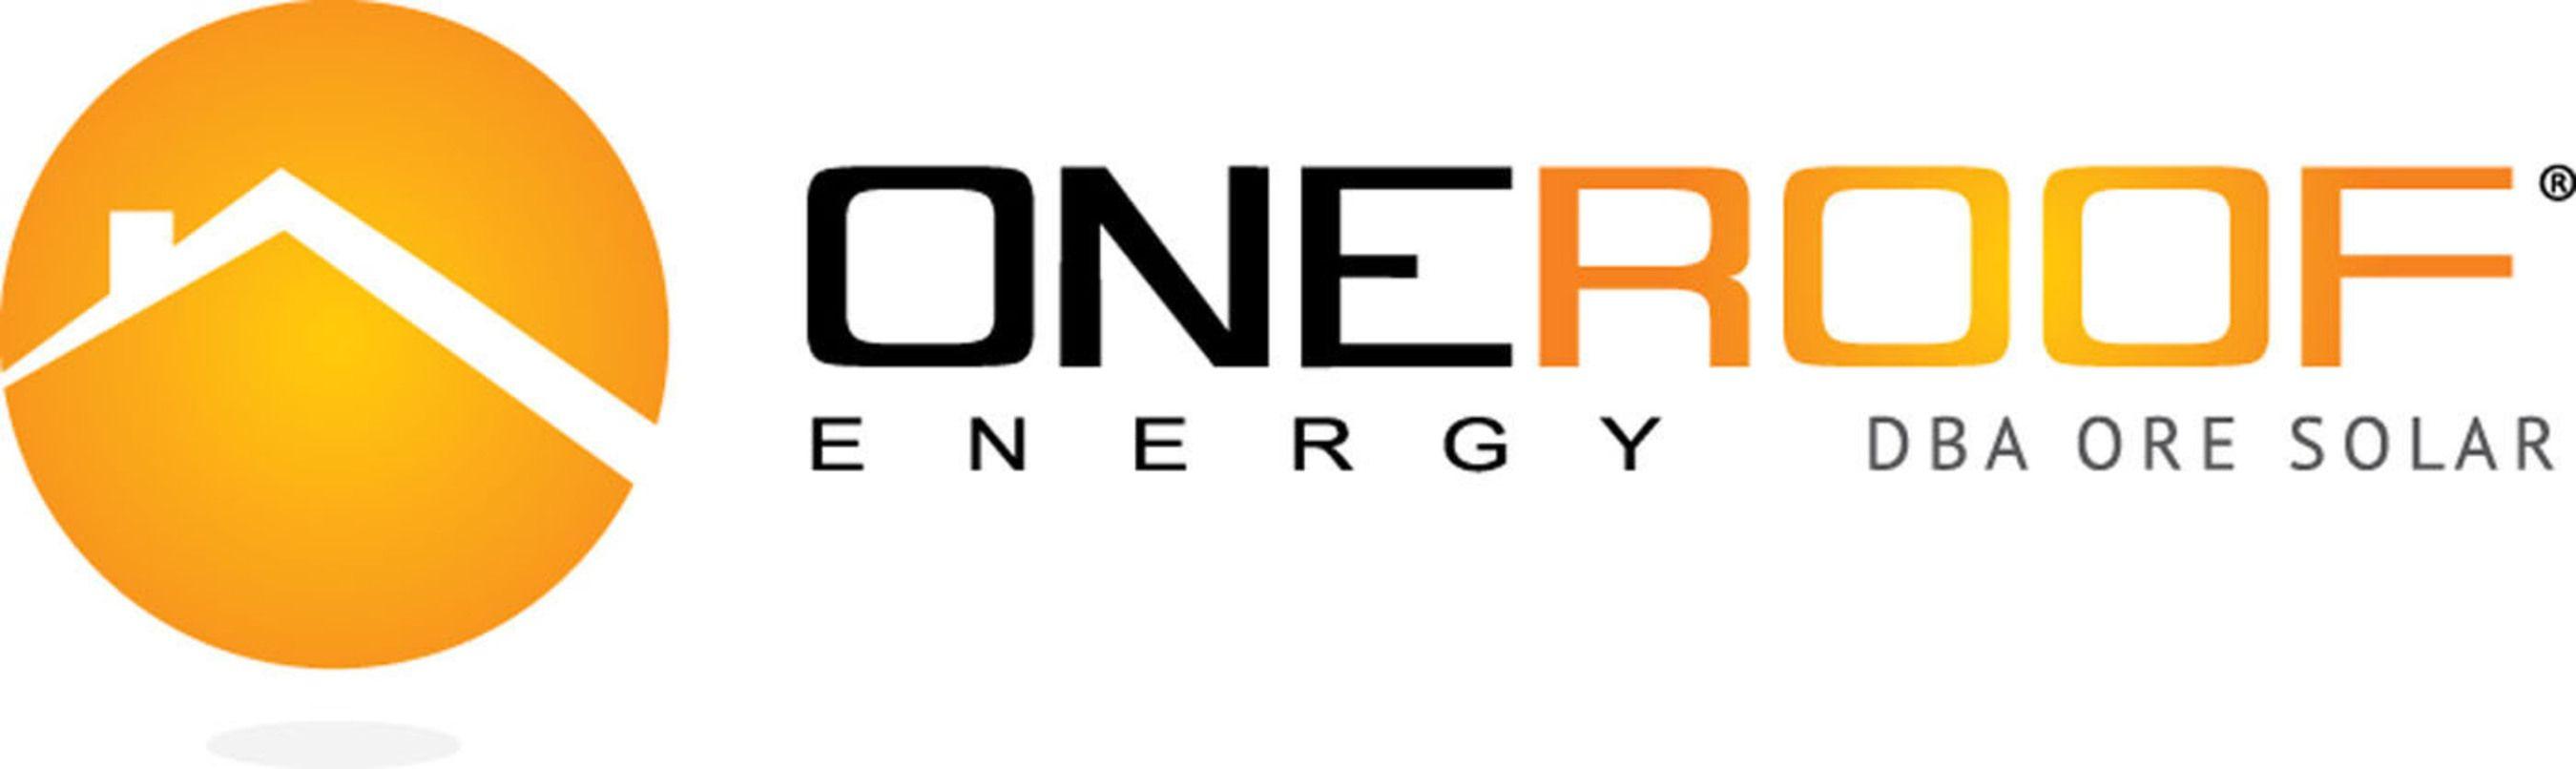 Fry's Electronics Logo - OneRoof Energy Teams up with Fry's Electronics